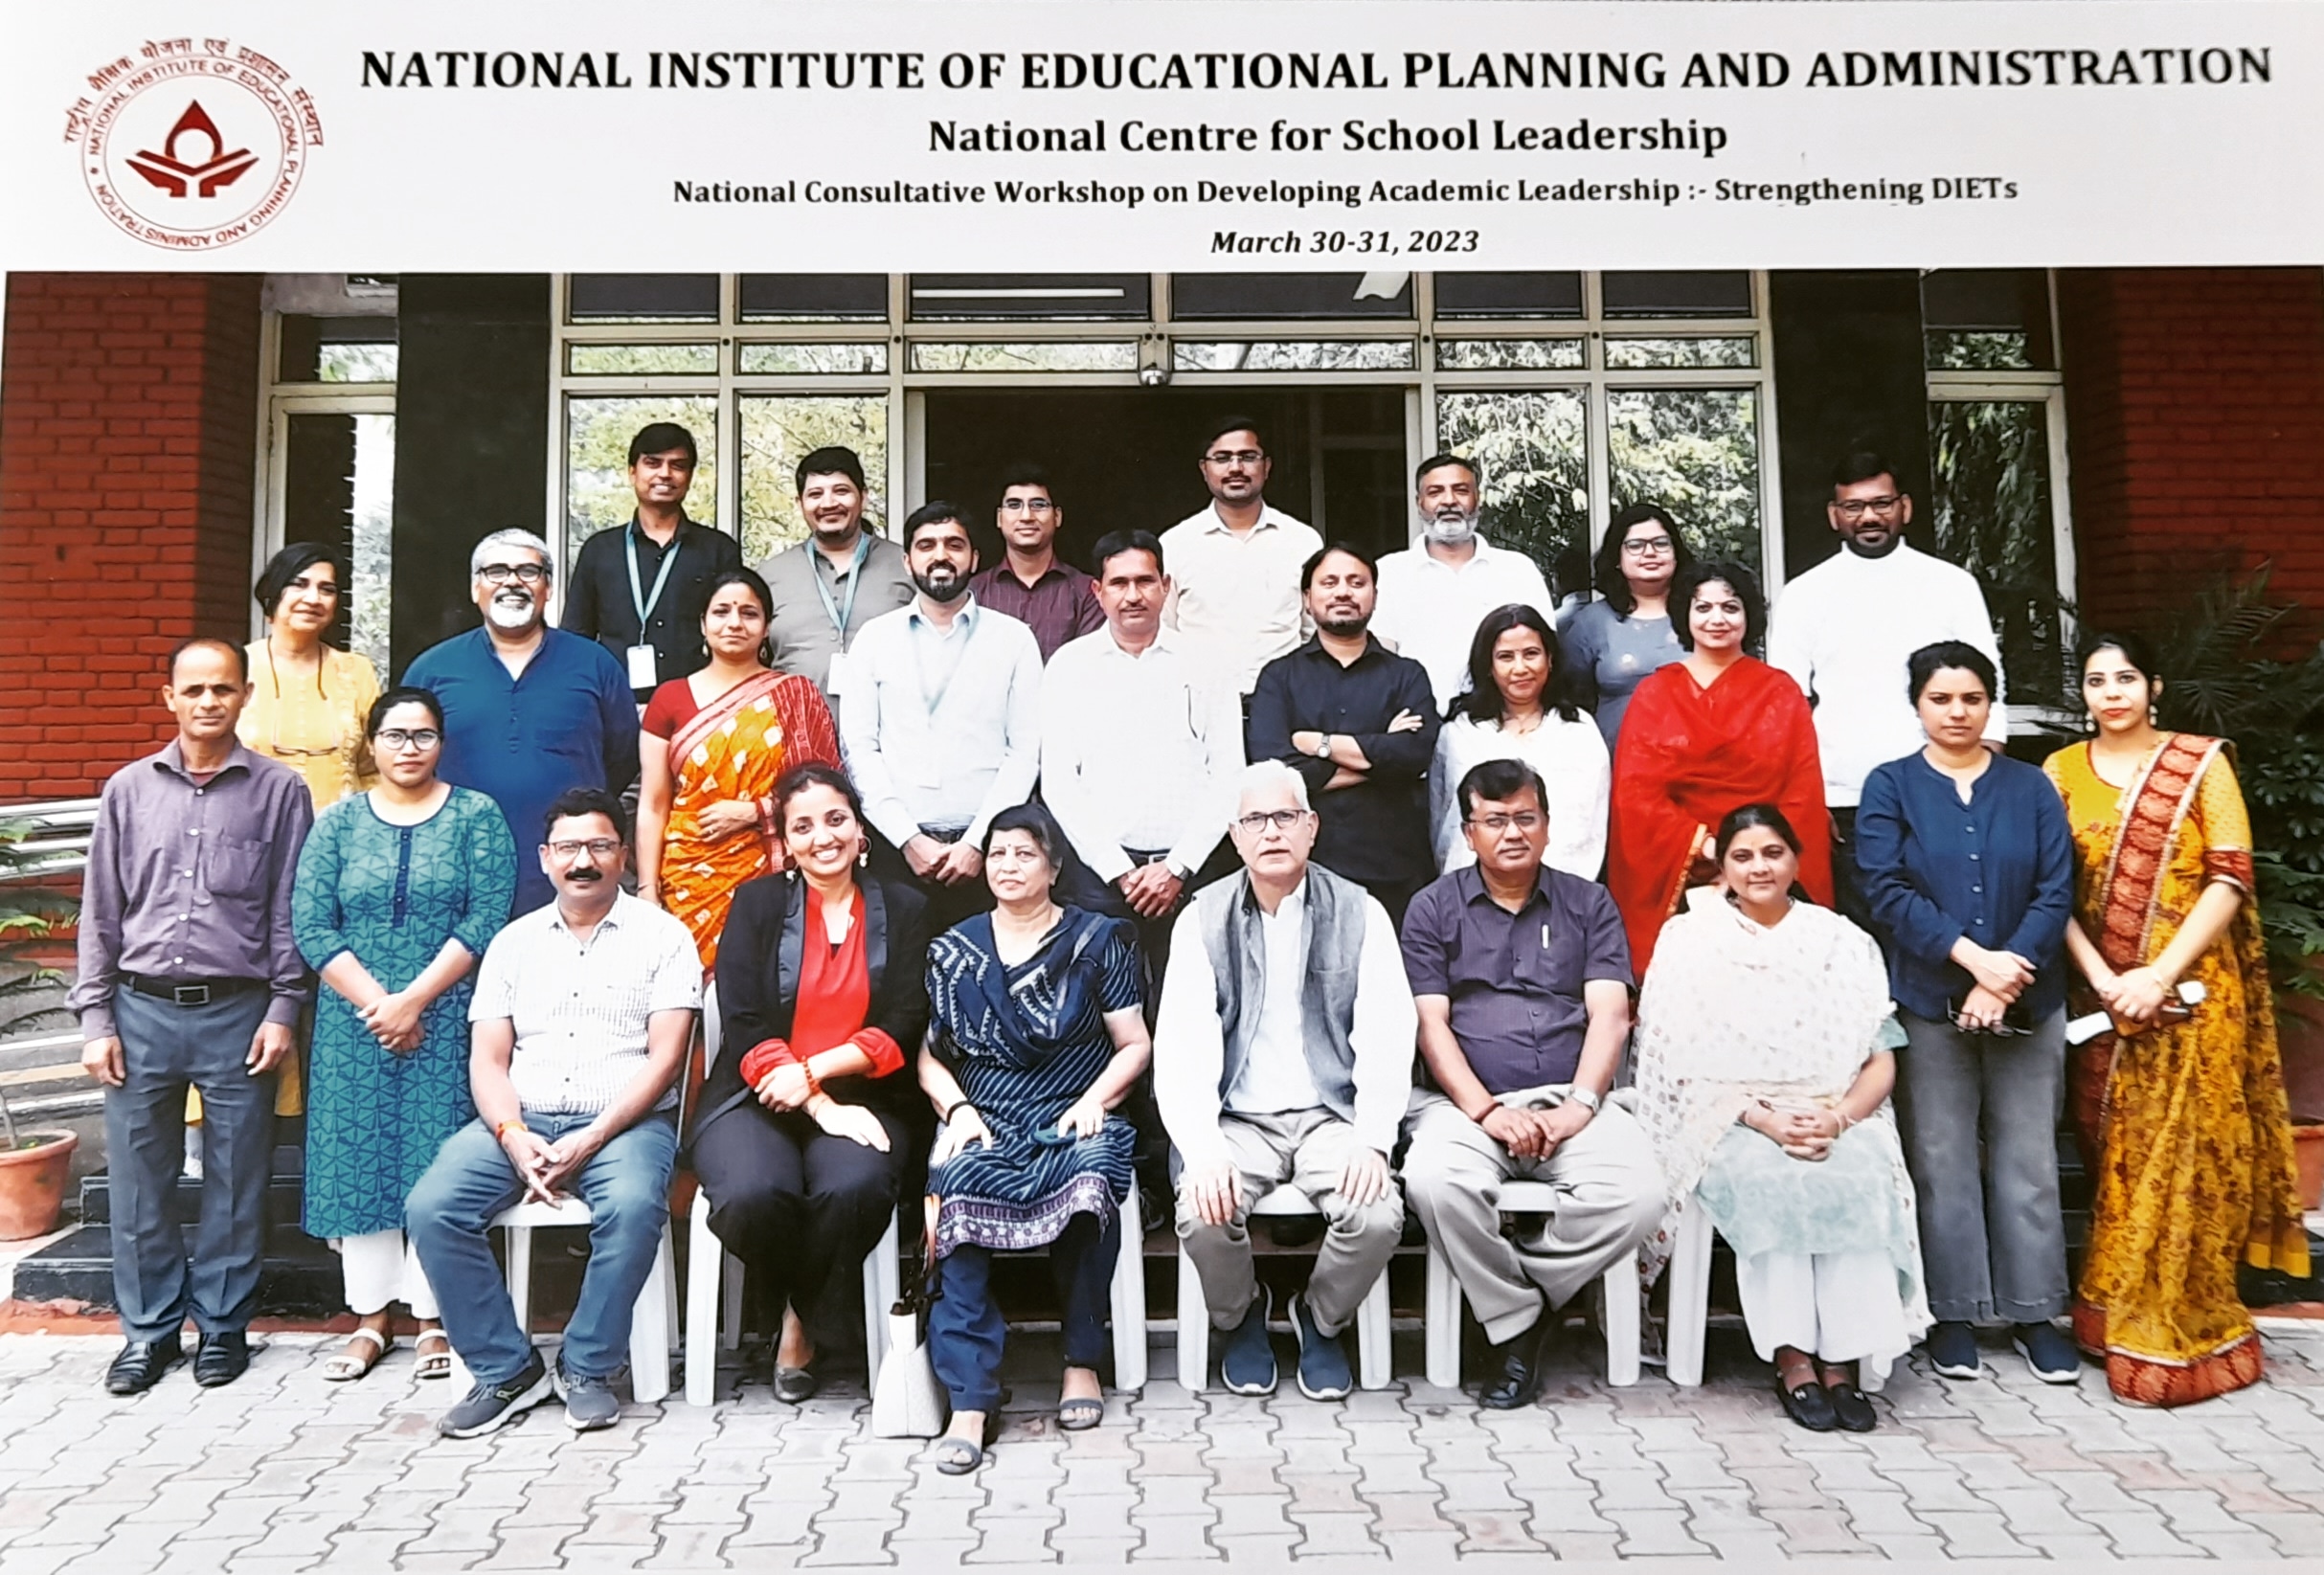 HPPI presents its teacher education implementation methodology at NIEPA 